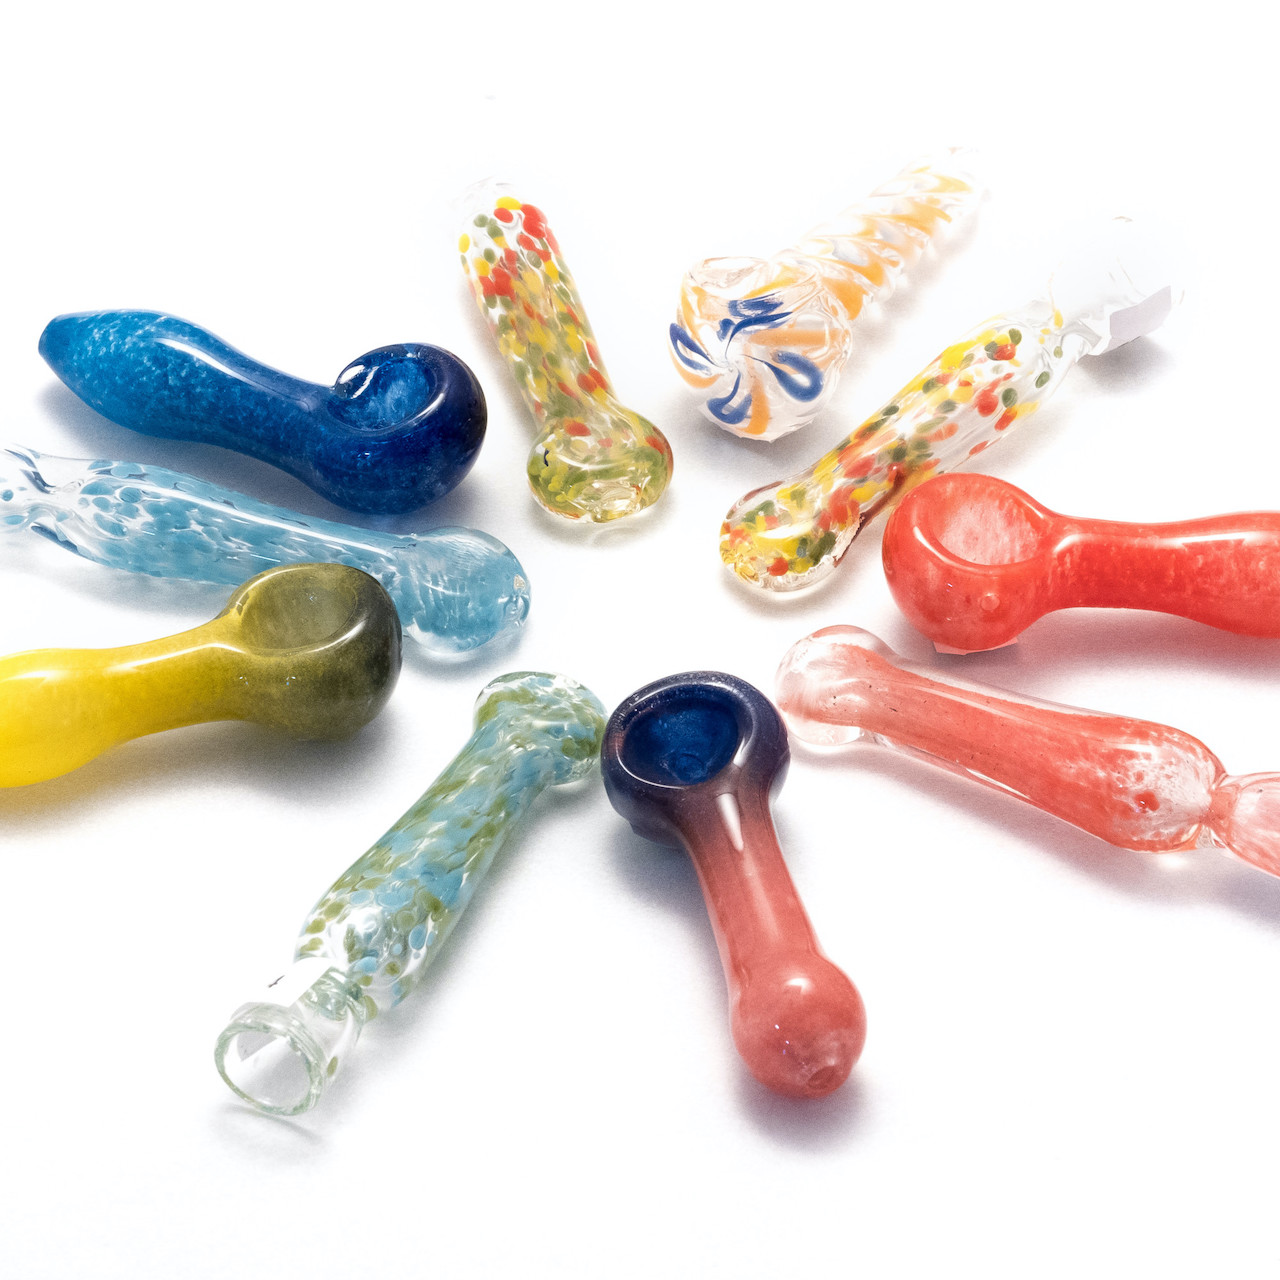 What Are the Best Types of Weed Pipes for Smoking?